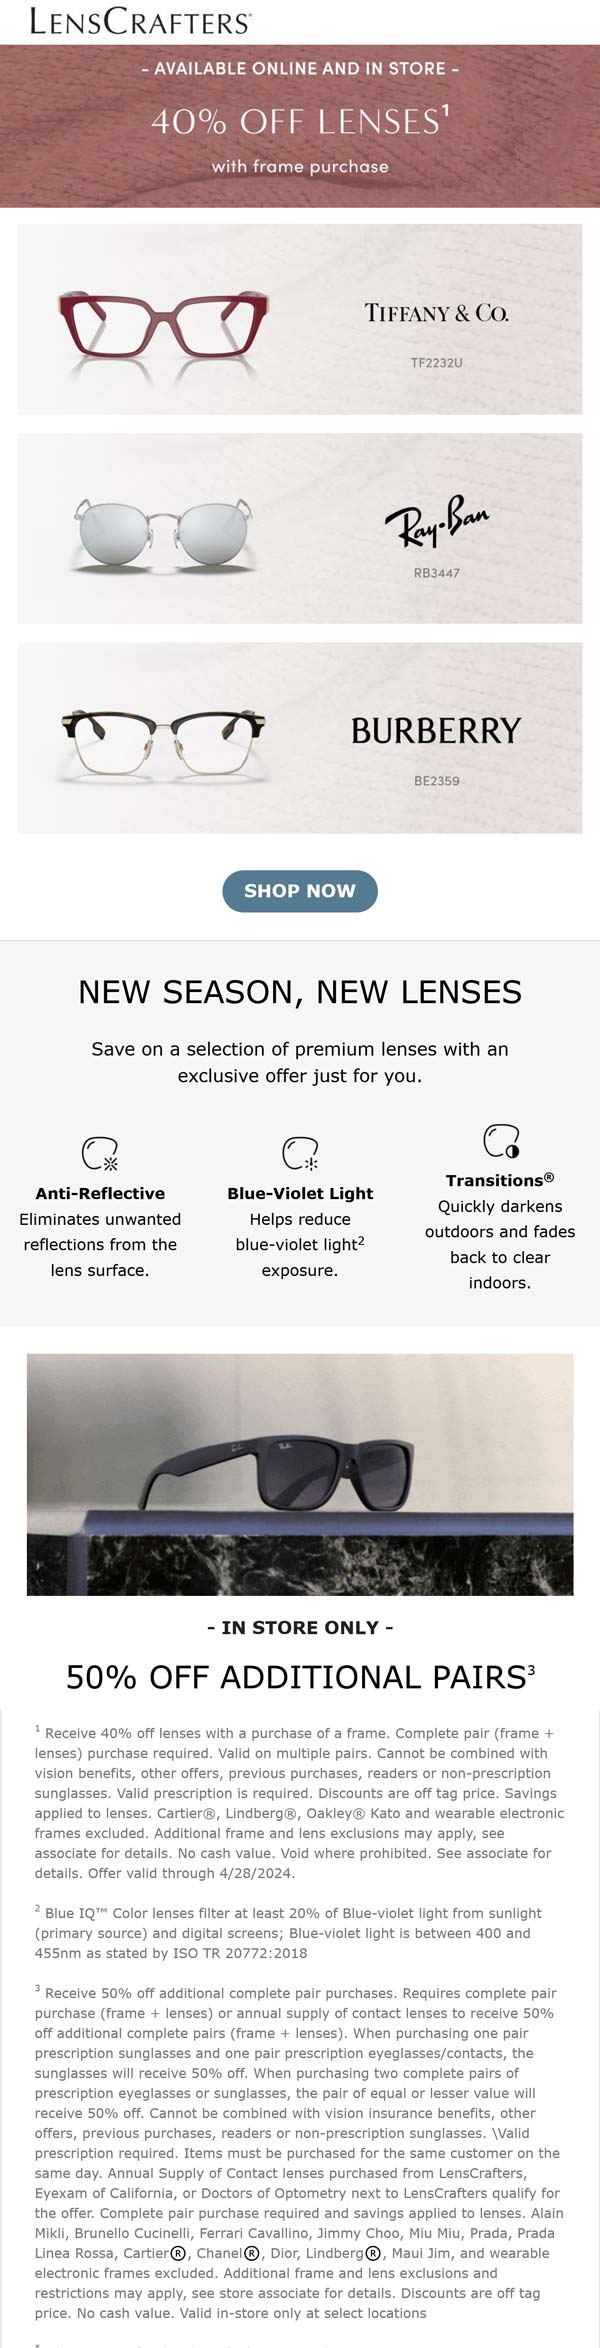 Lenscrafters stores Coupon  40-50% off lenses with your frame at Lenscrafters, ditto online #lenscrafters 